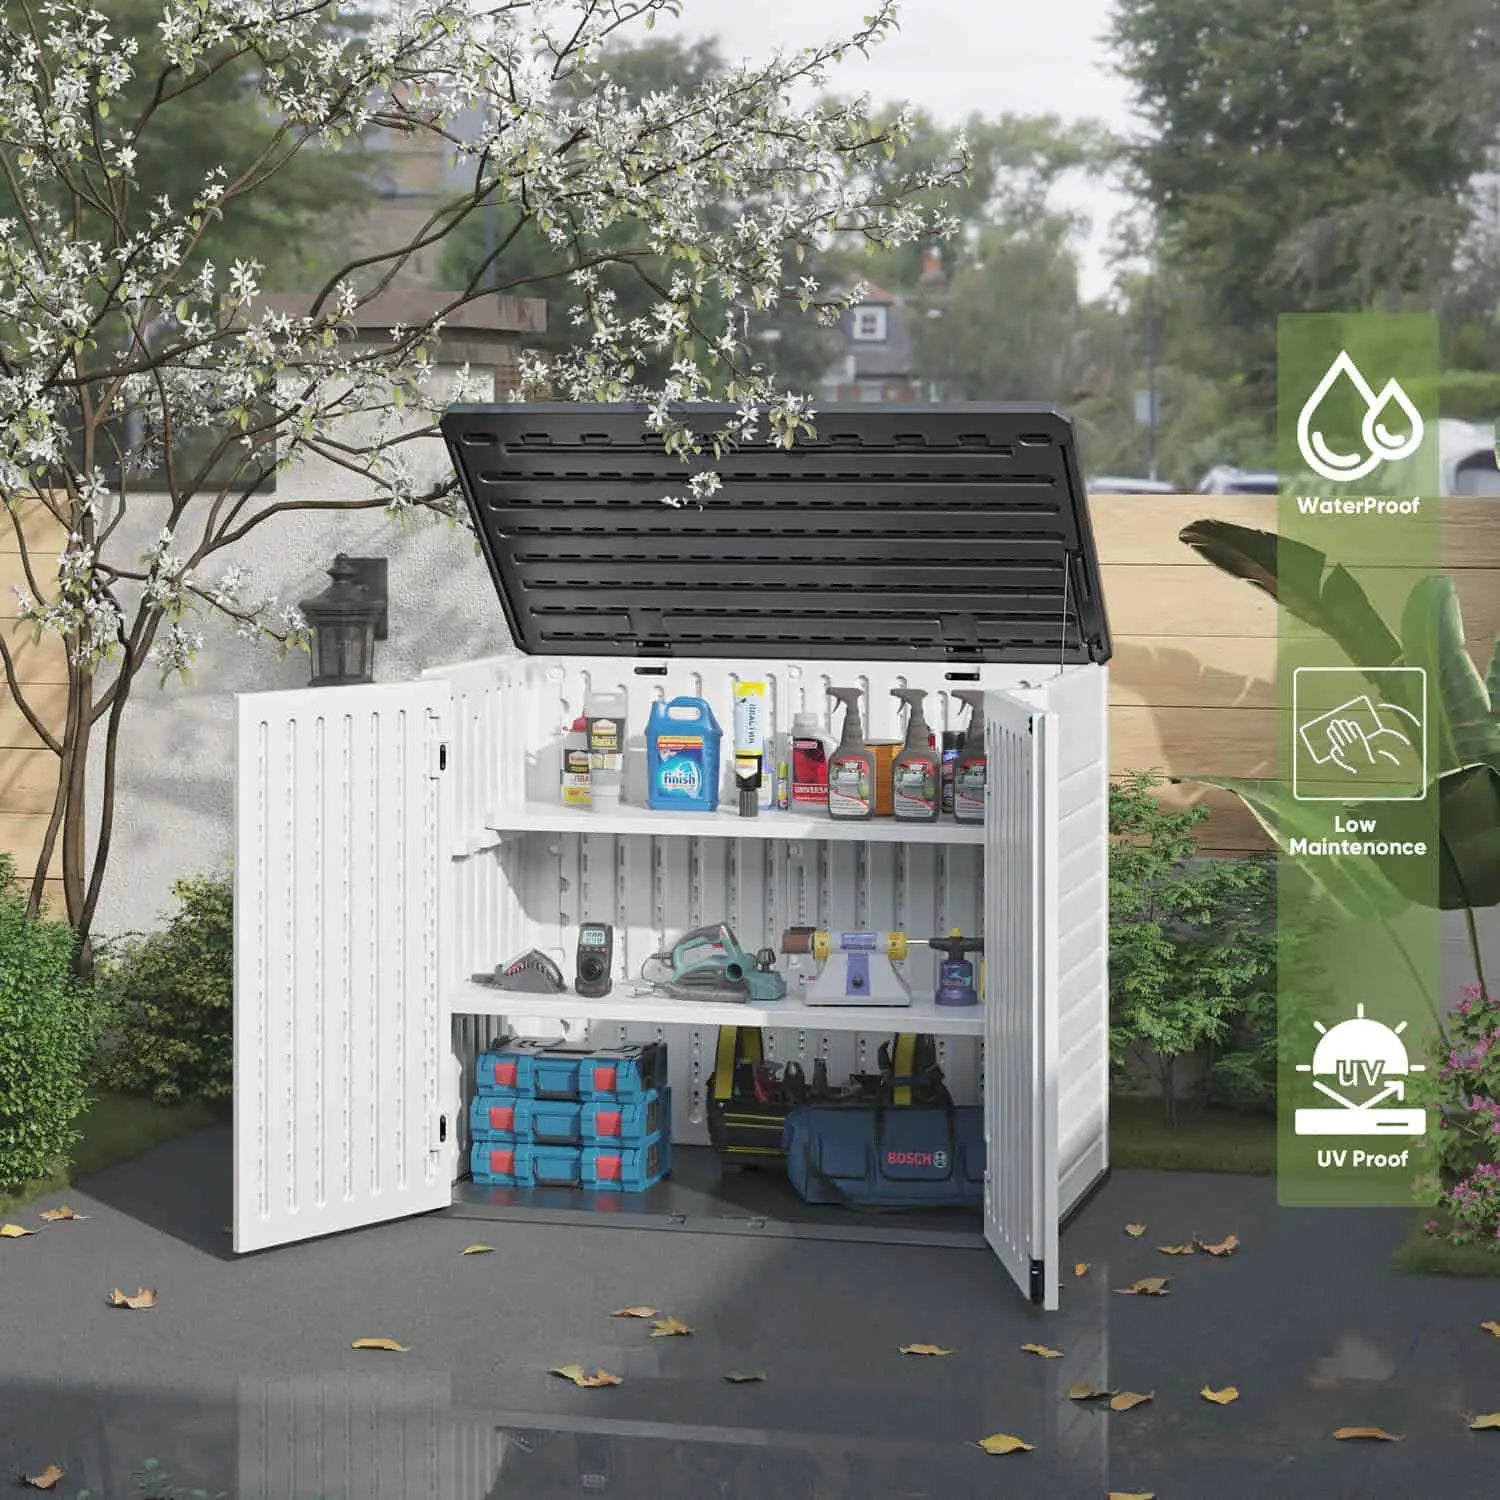 Patiowell 4x2 Plastic Shed Pro